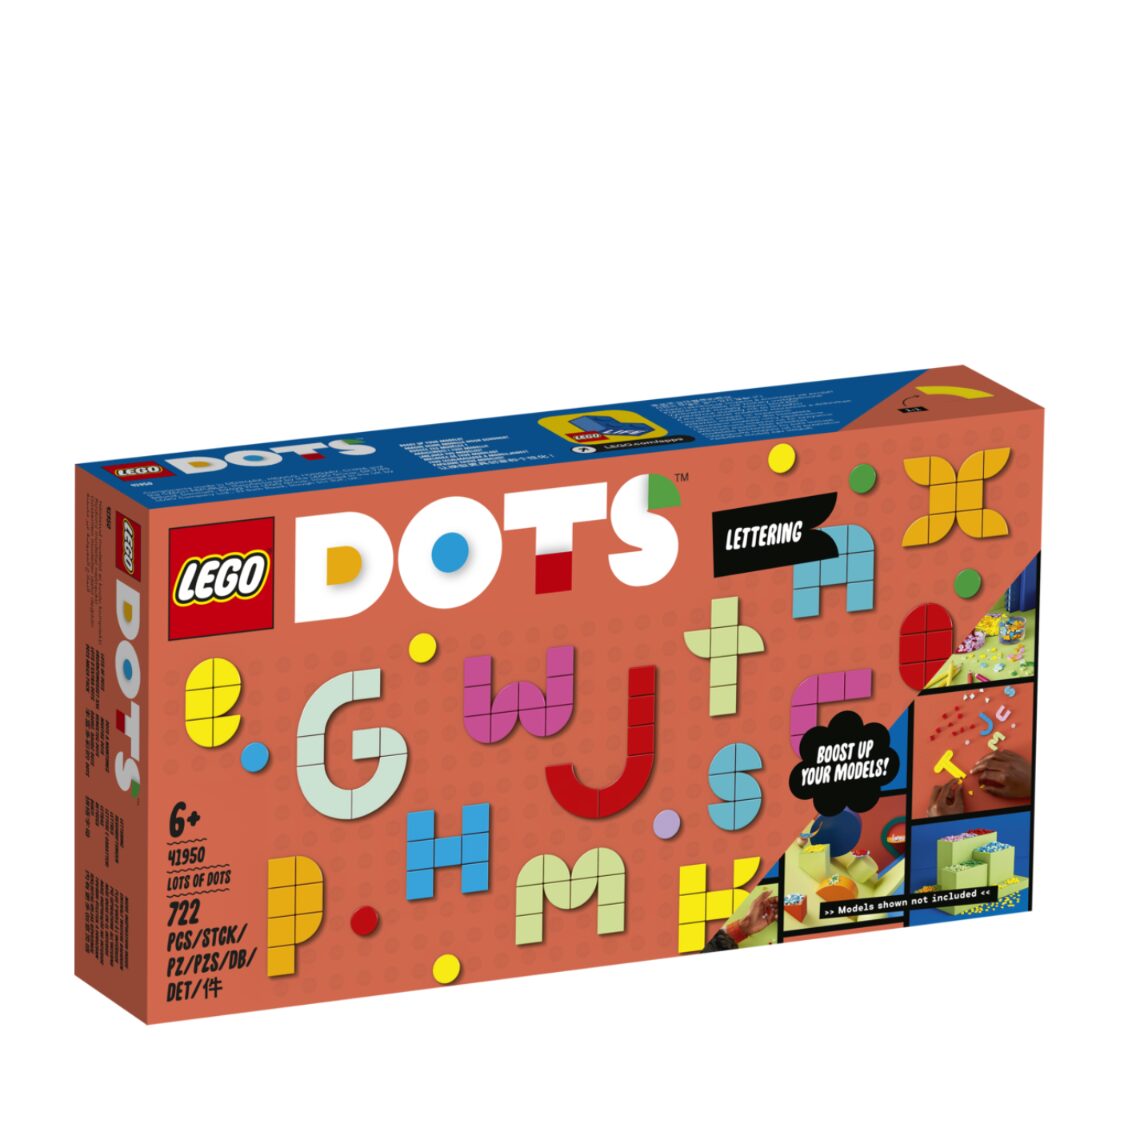 LEGO Lots of DOTS  Lettering 41950